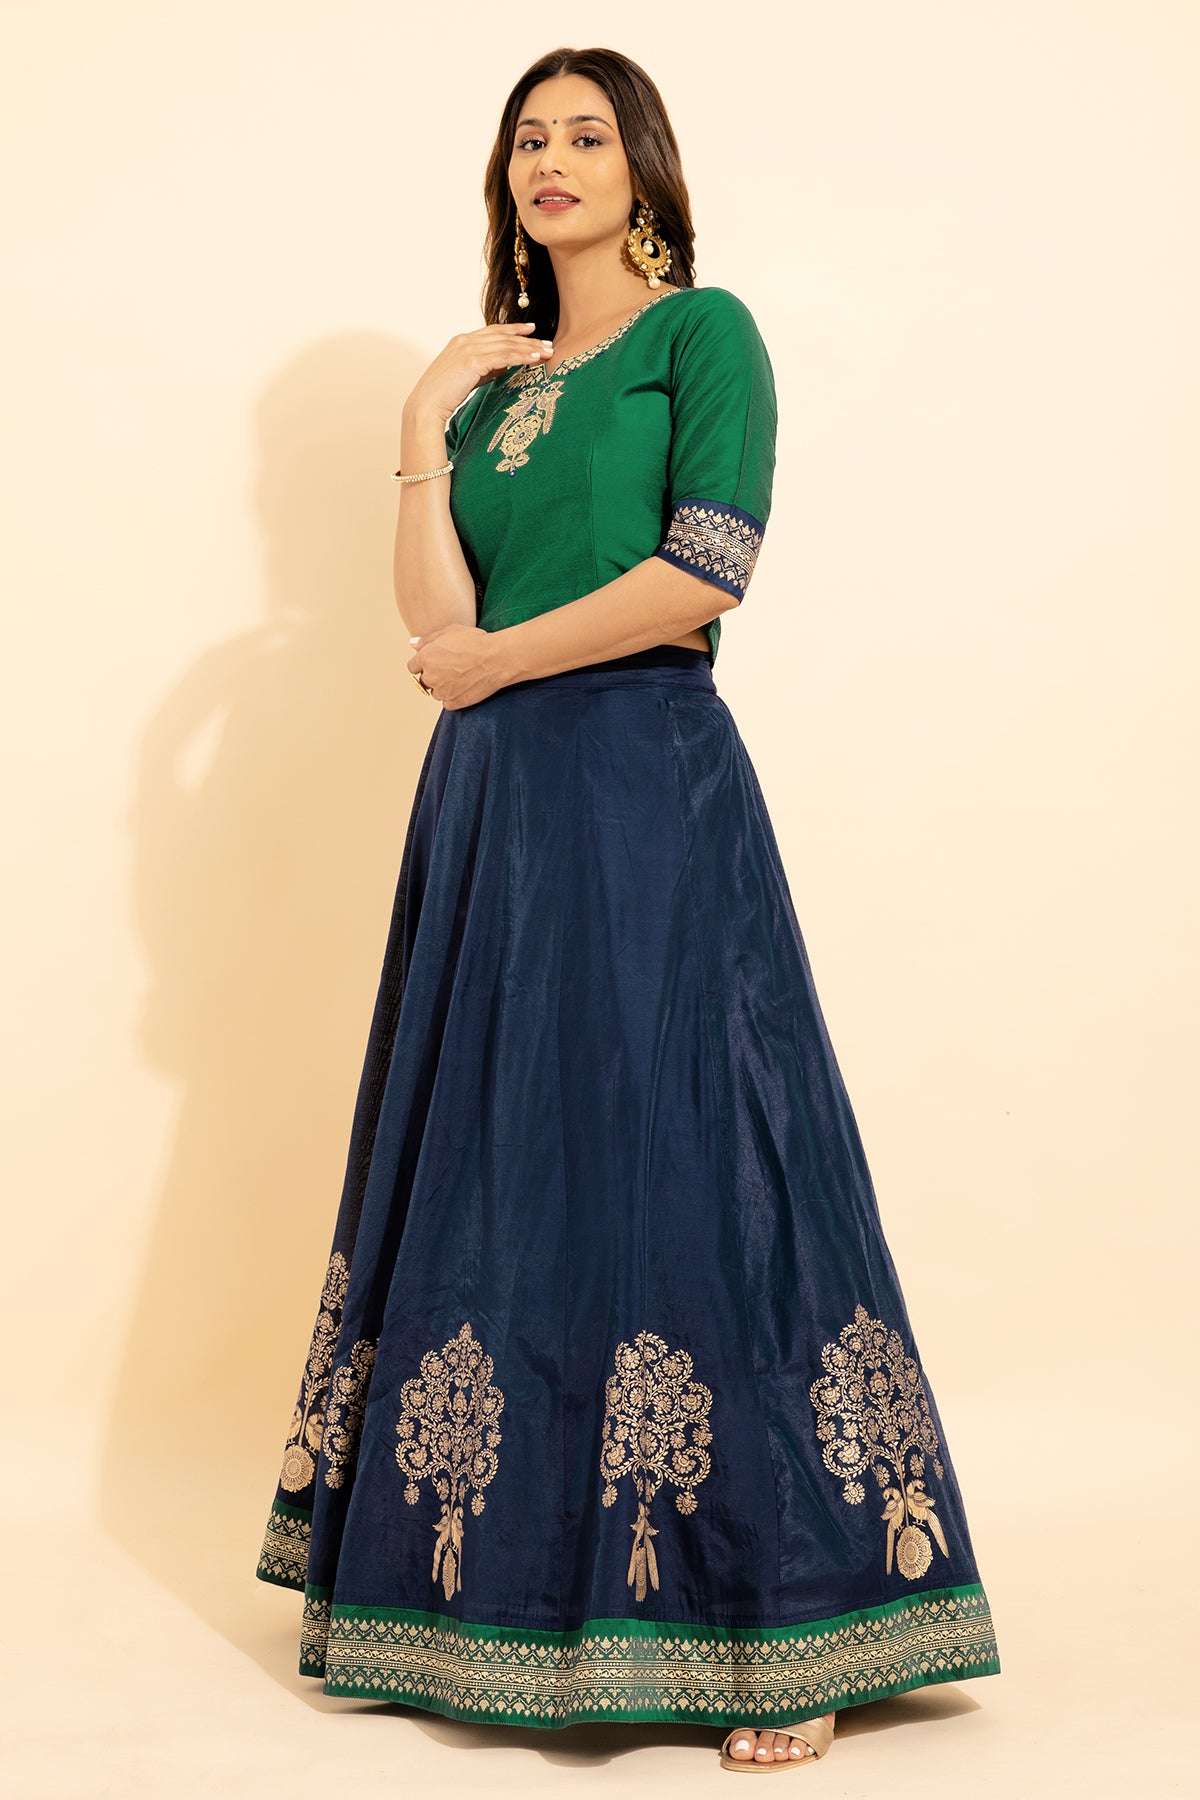 Peacock Placement Embroidered With Foil Mirror Embellished Top & Floral Printed Skirt Set - Green & Navy Blue